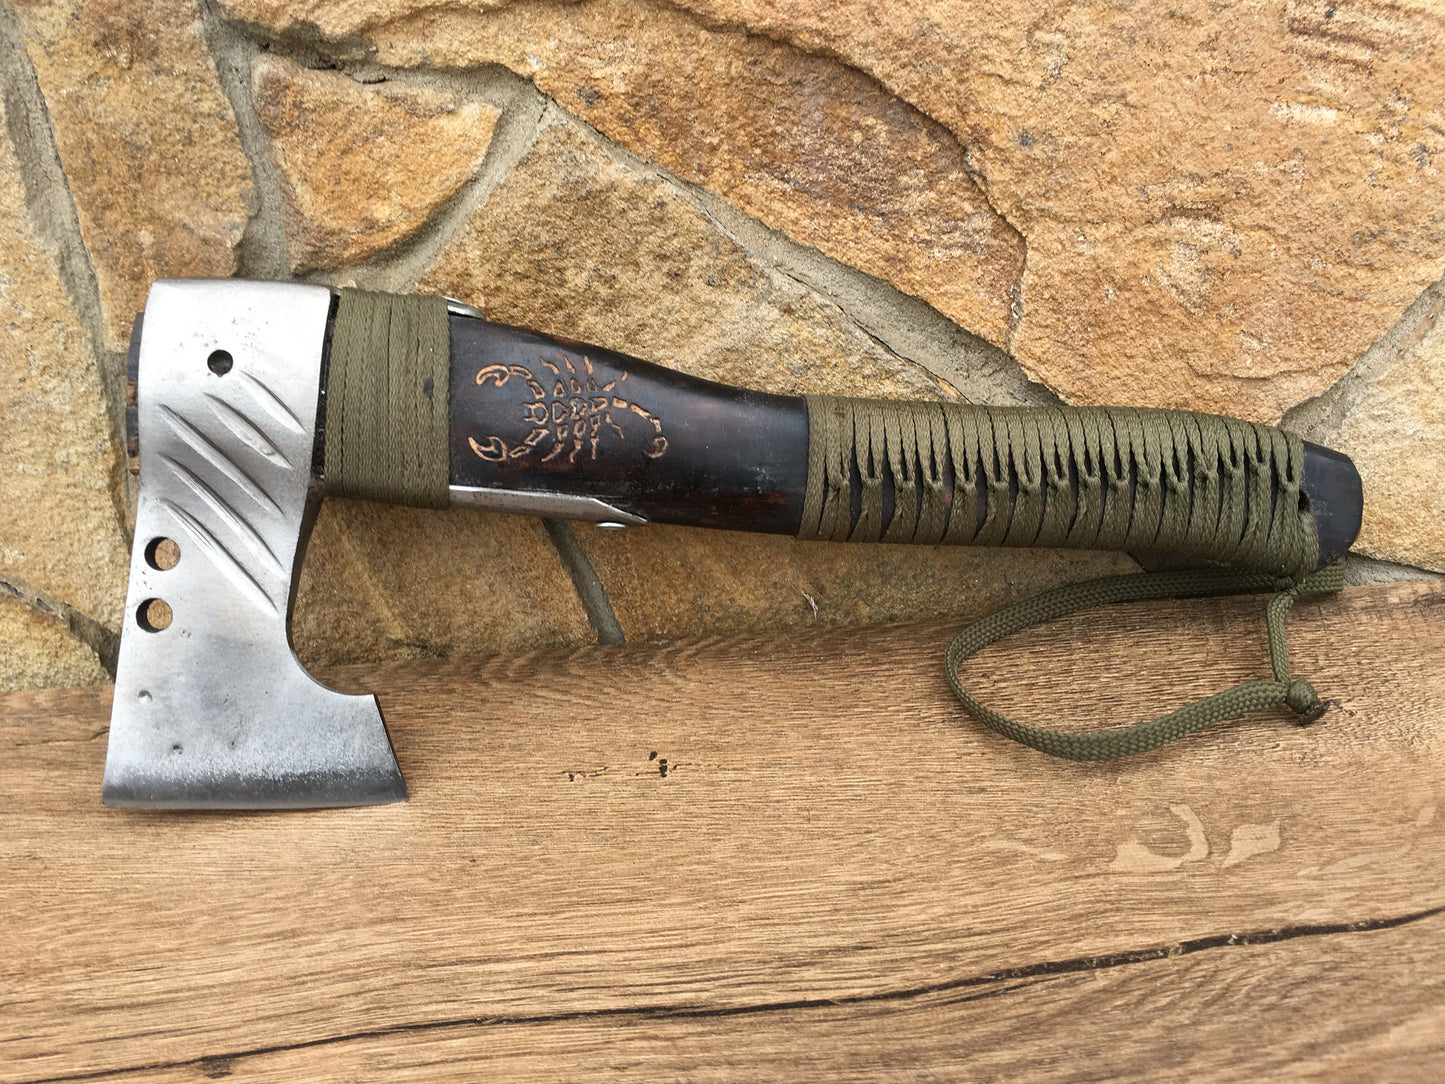 Viking axe, medieval axe, manly gifts, tomahawk, bearded axe, carving axe, engraved axe, husband gift, custom axe, dad gifts, mens gifts